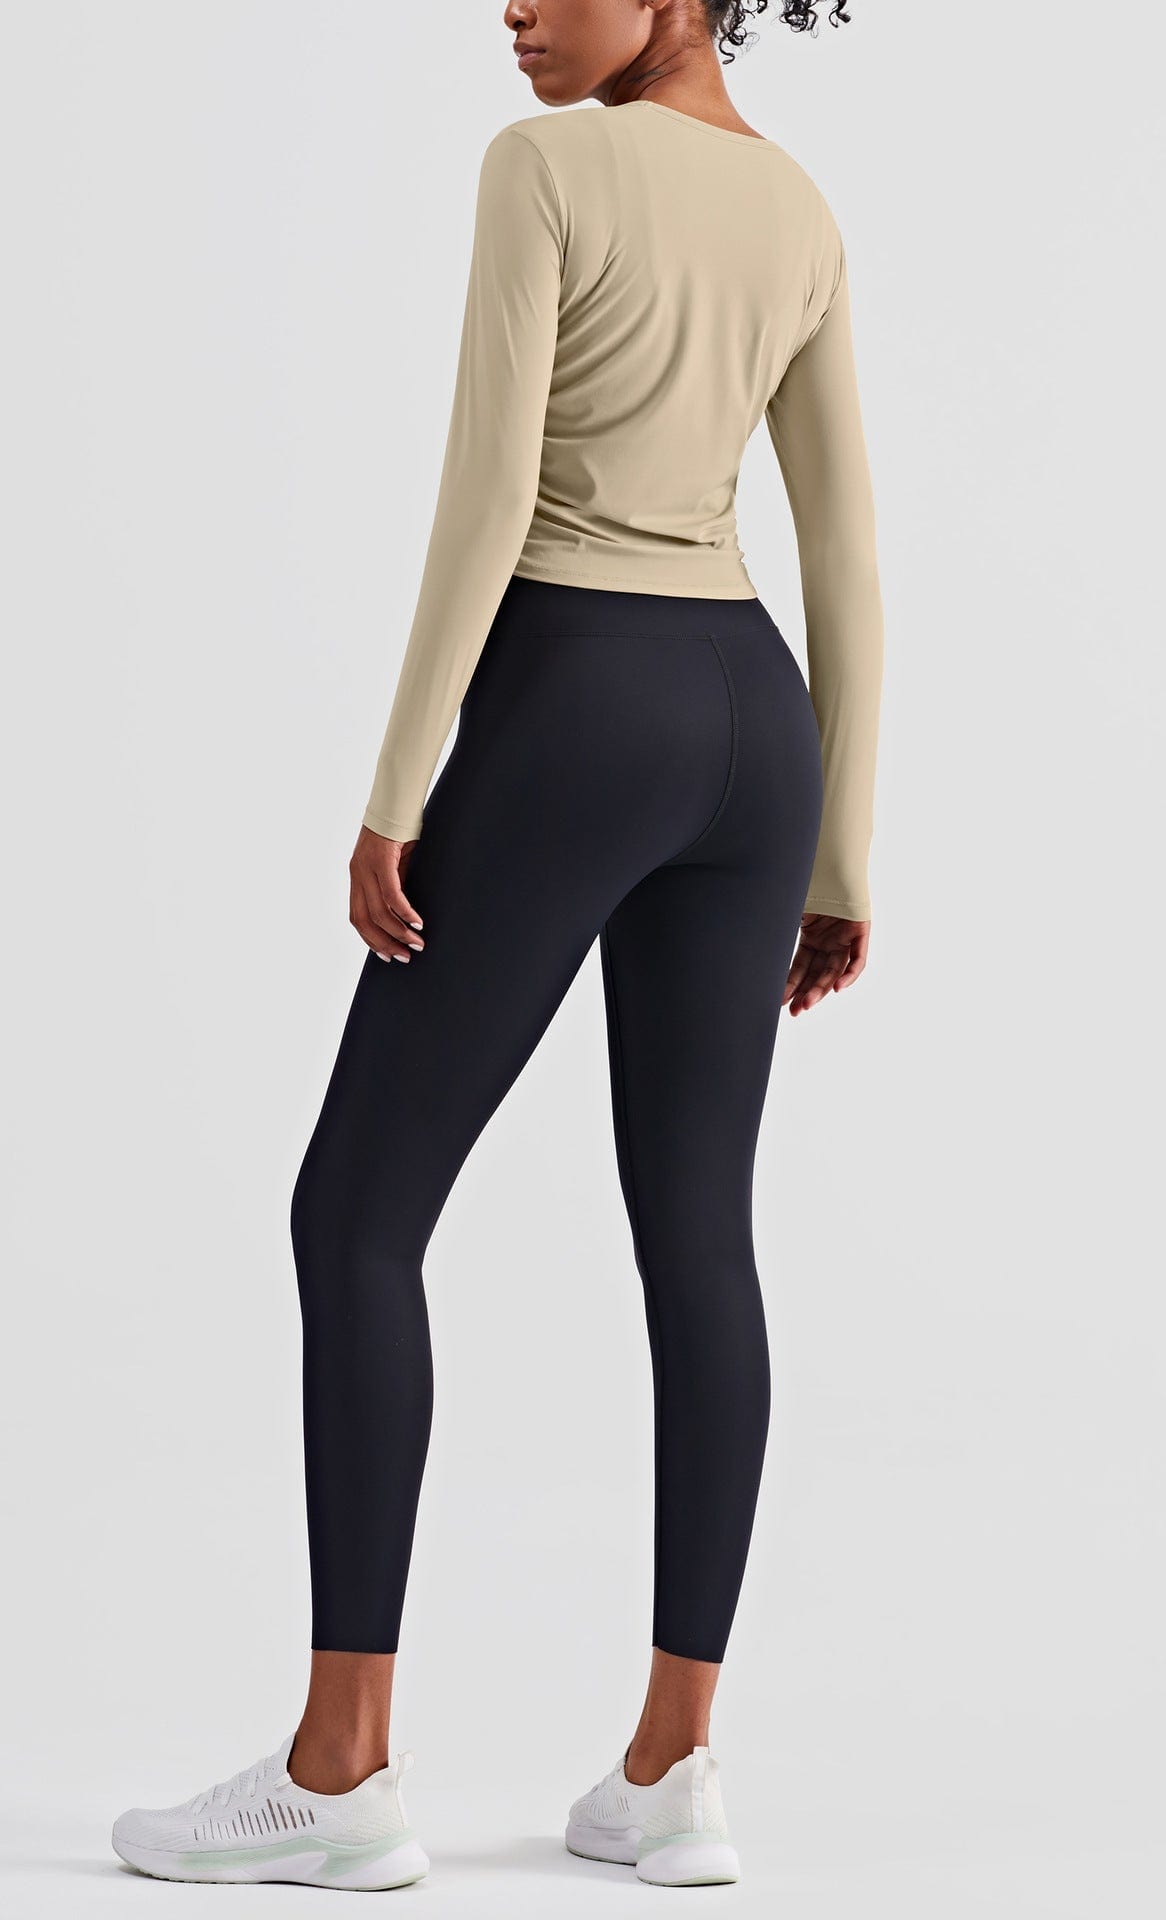 Stretchy Ruched Long Sleeve Active Shirt